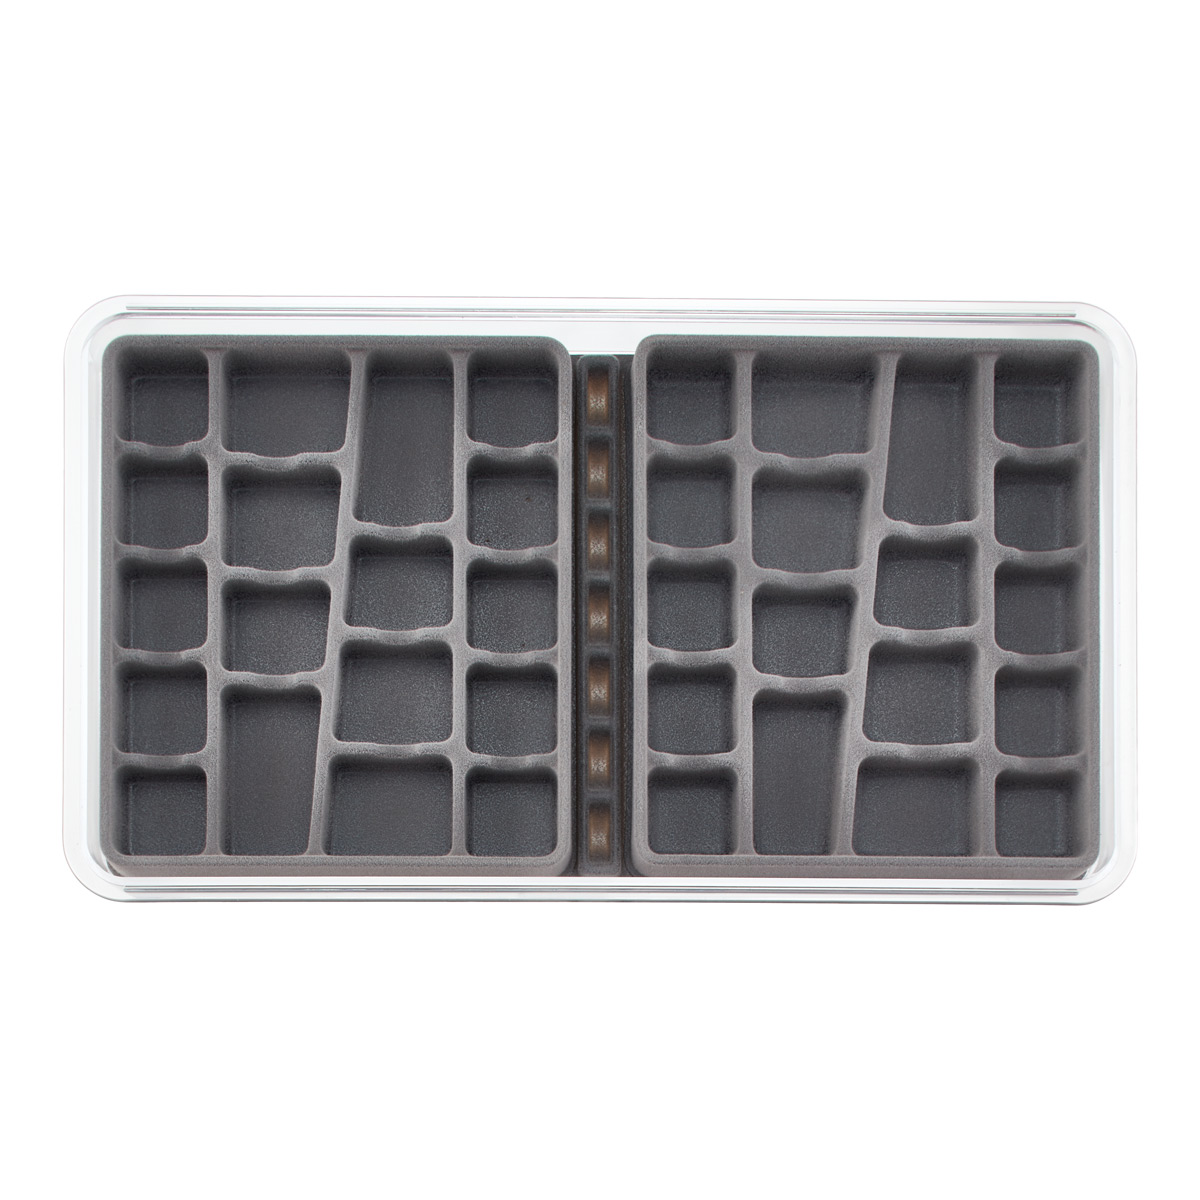 https://images.containerstore.com/catalogimages/527496/10069912StackingJewelryTray36&7Gry_1.jpg